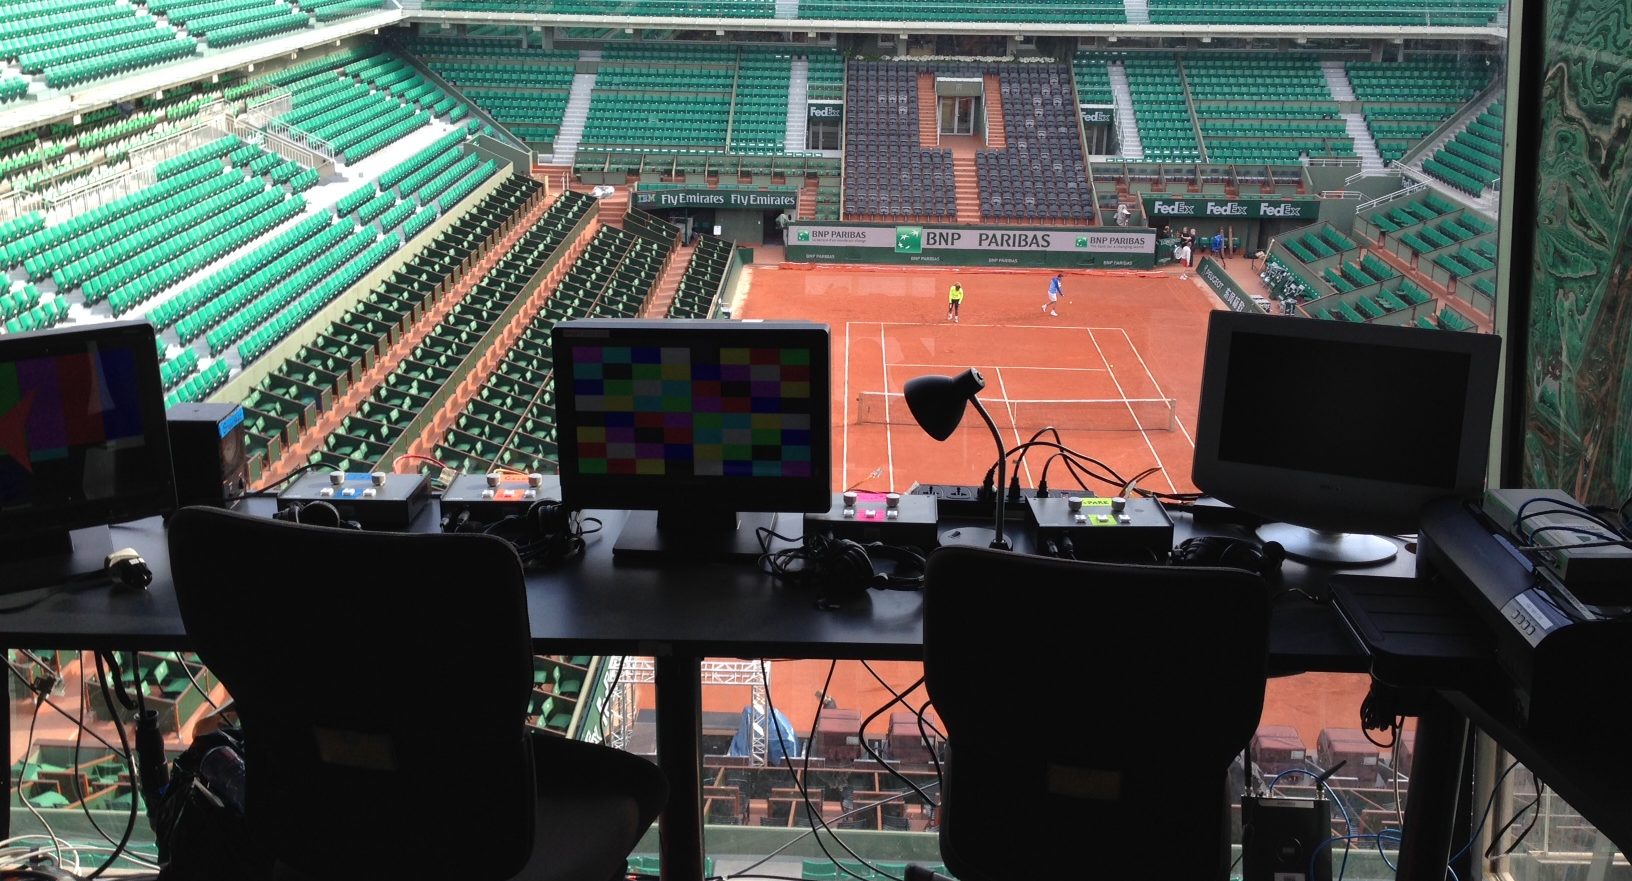 2019 French Open schedule and livestream